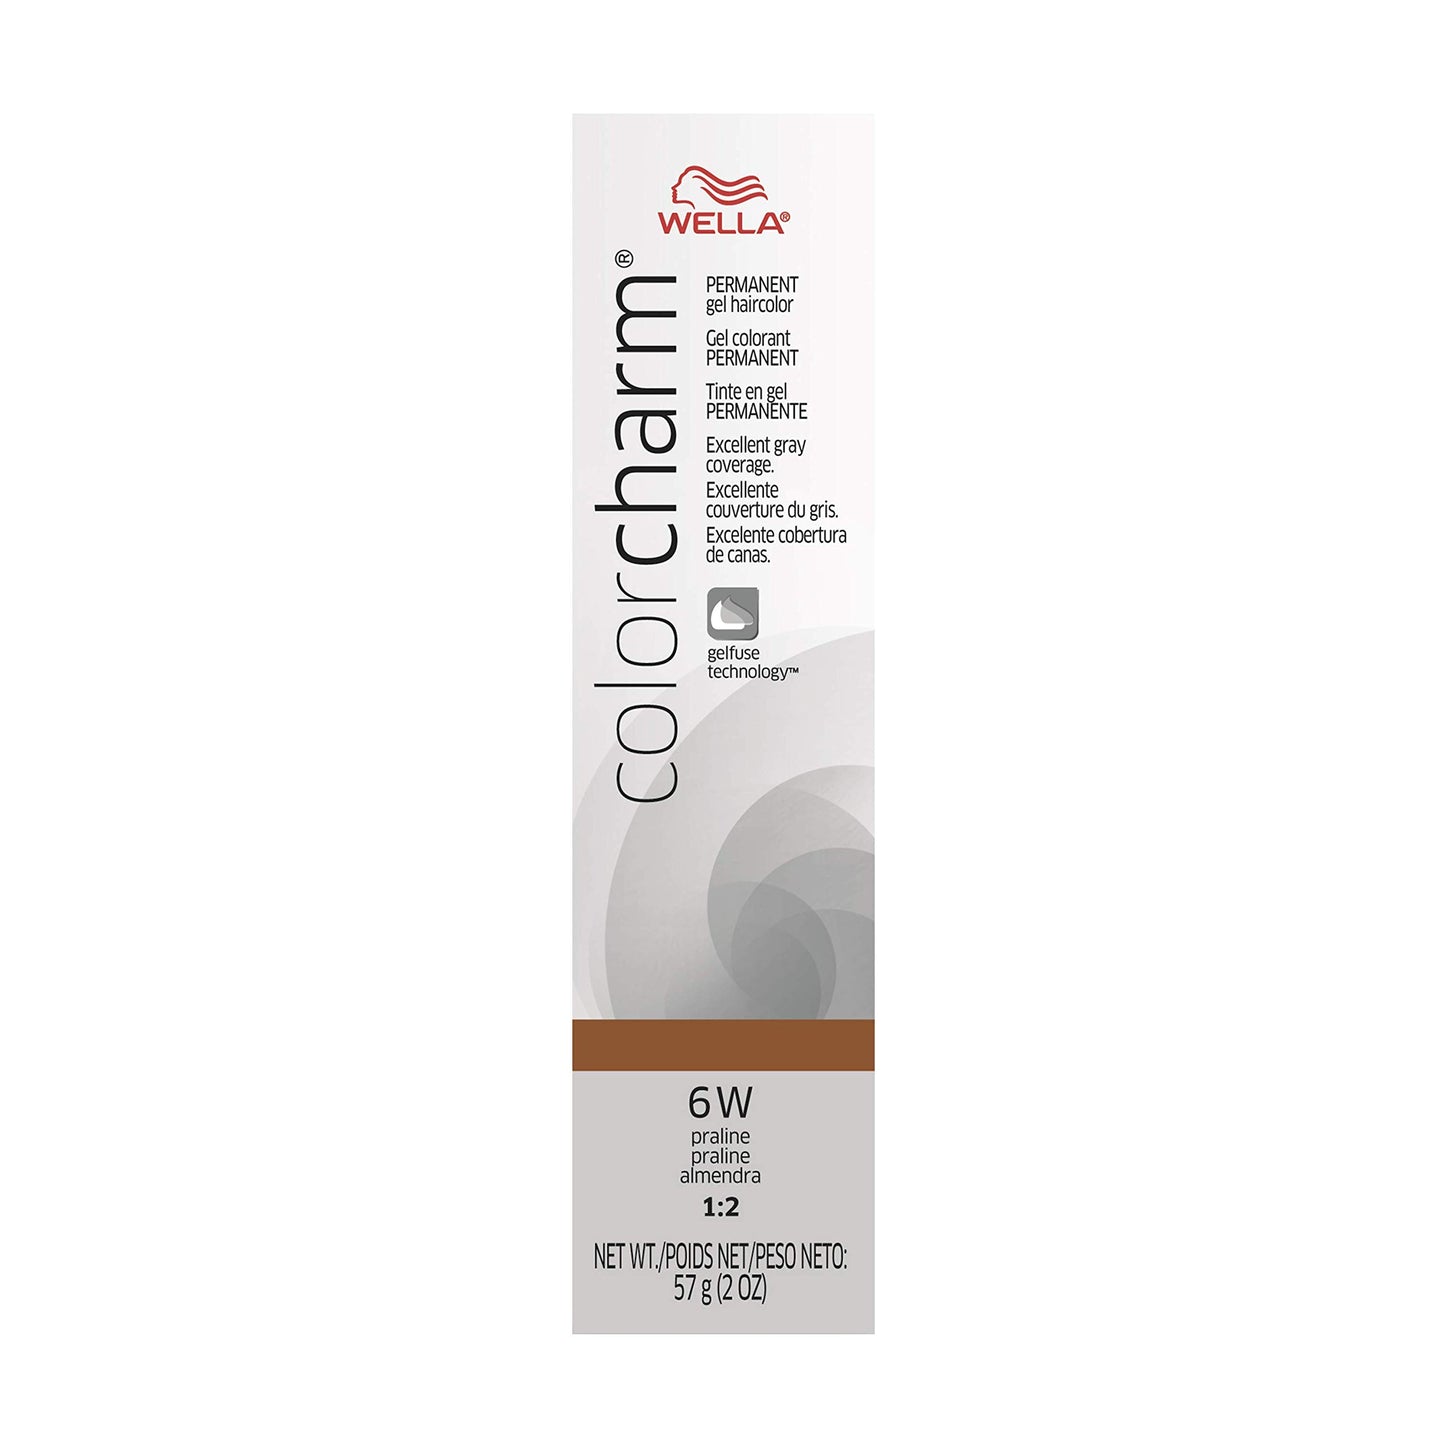 WELLA Color Charm Permanent Gel, Hair Color for Gray Coverage, 6W Praline